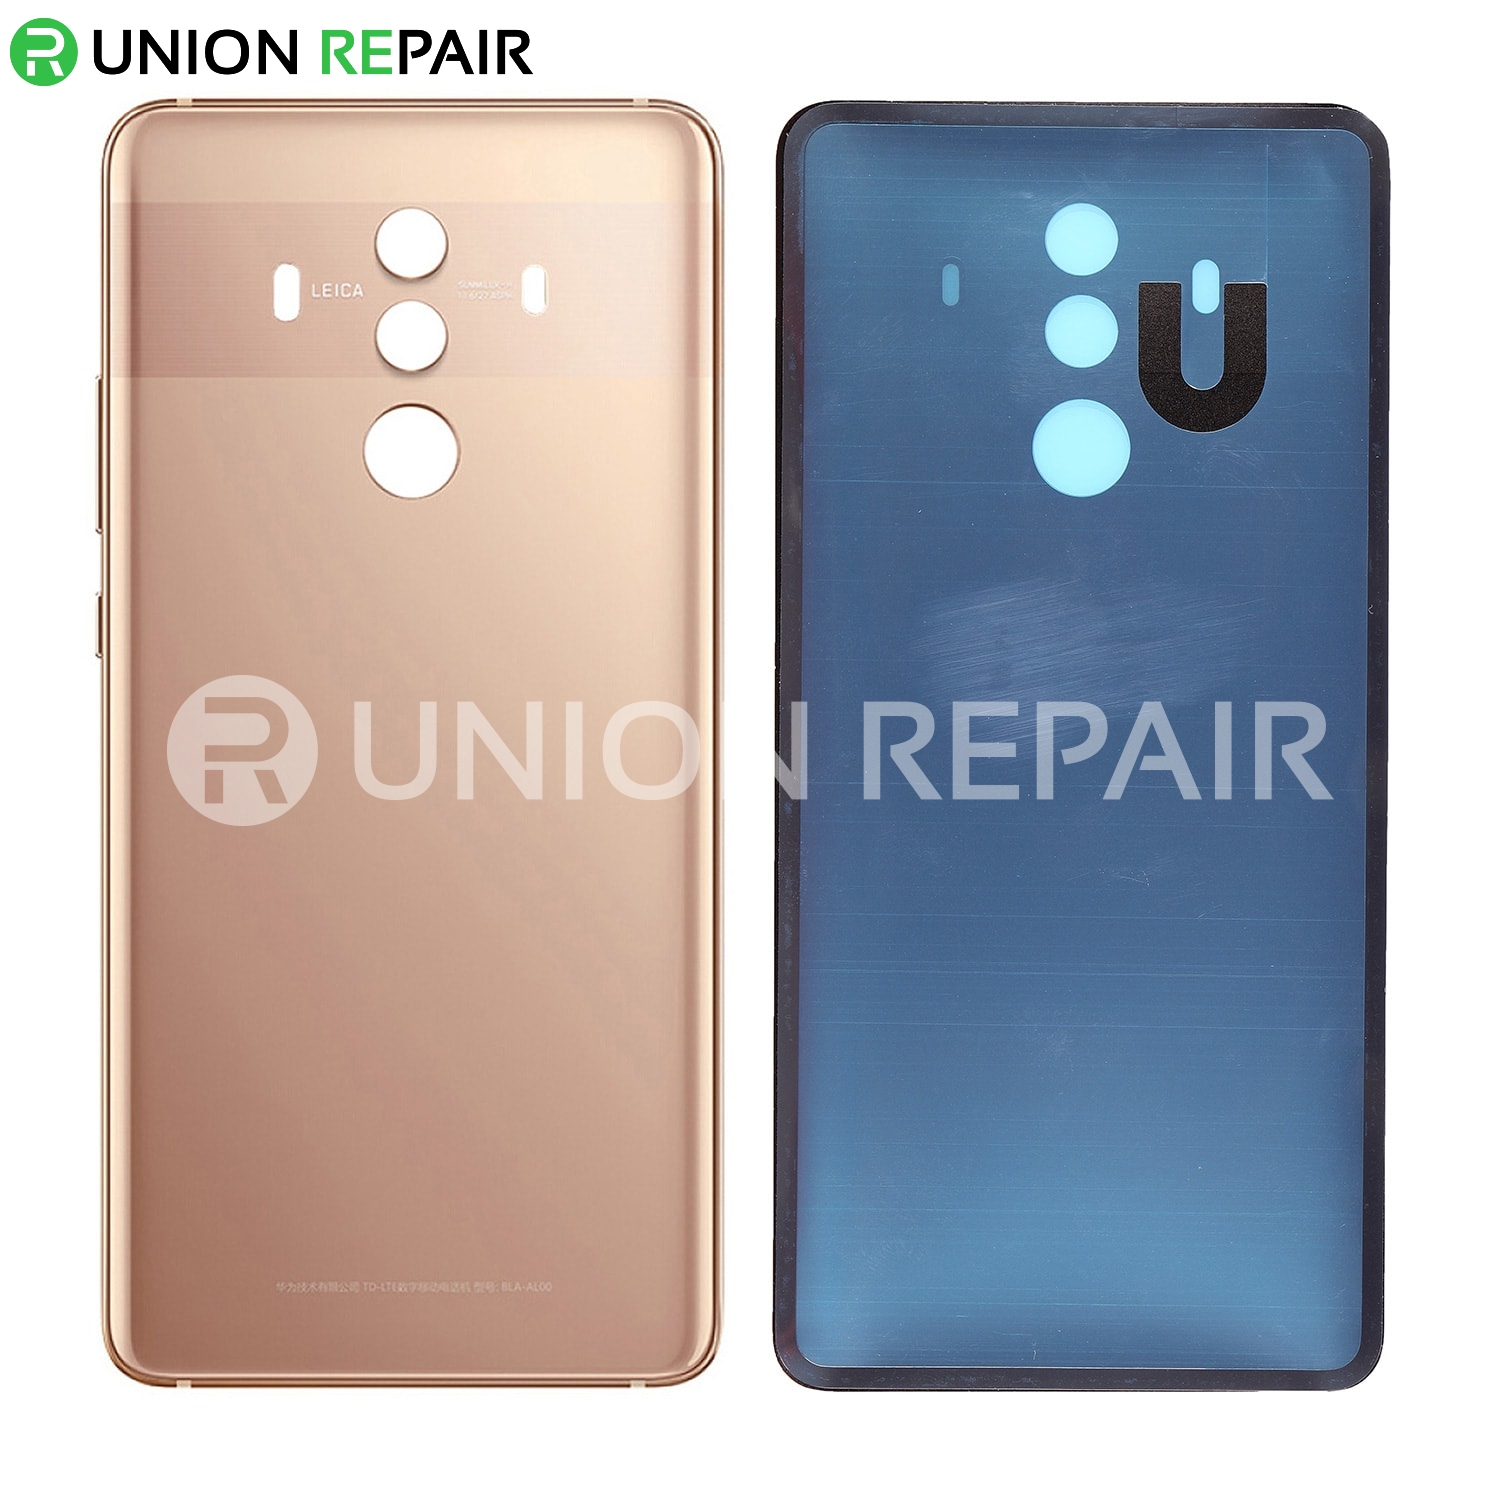 Replacement for Huawei Mate 10 Pro Battery Door - Pink Gold